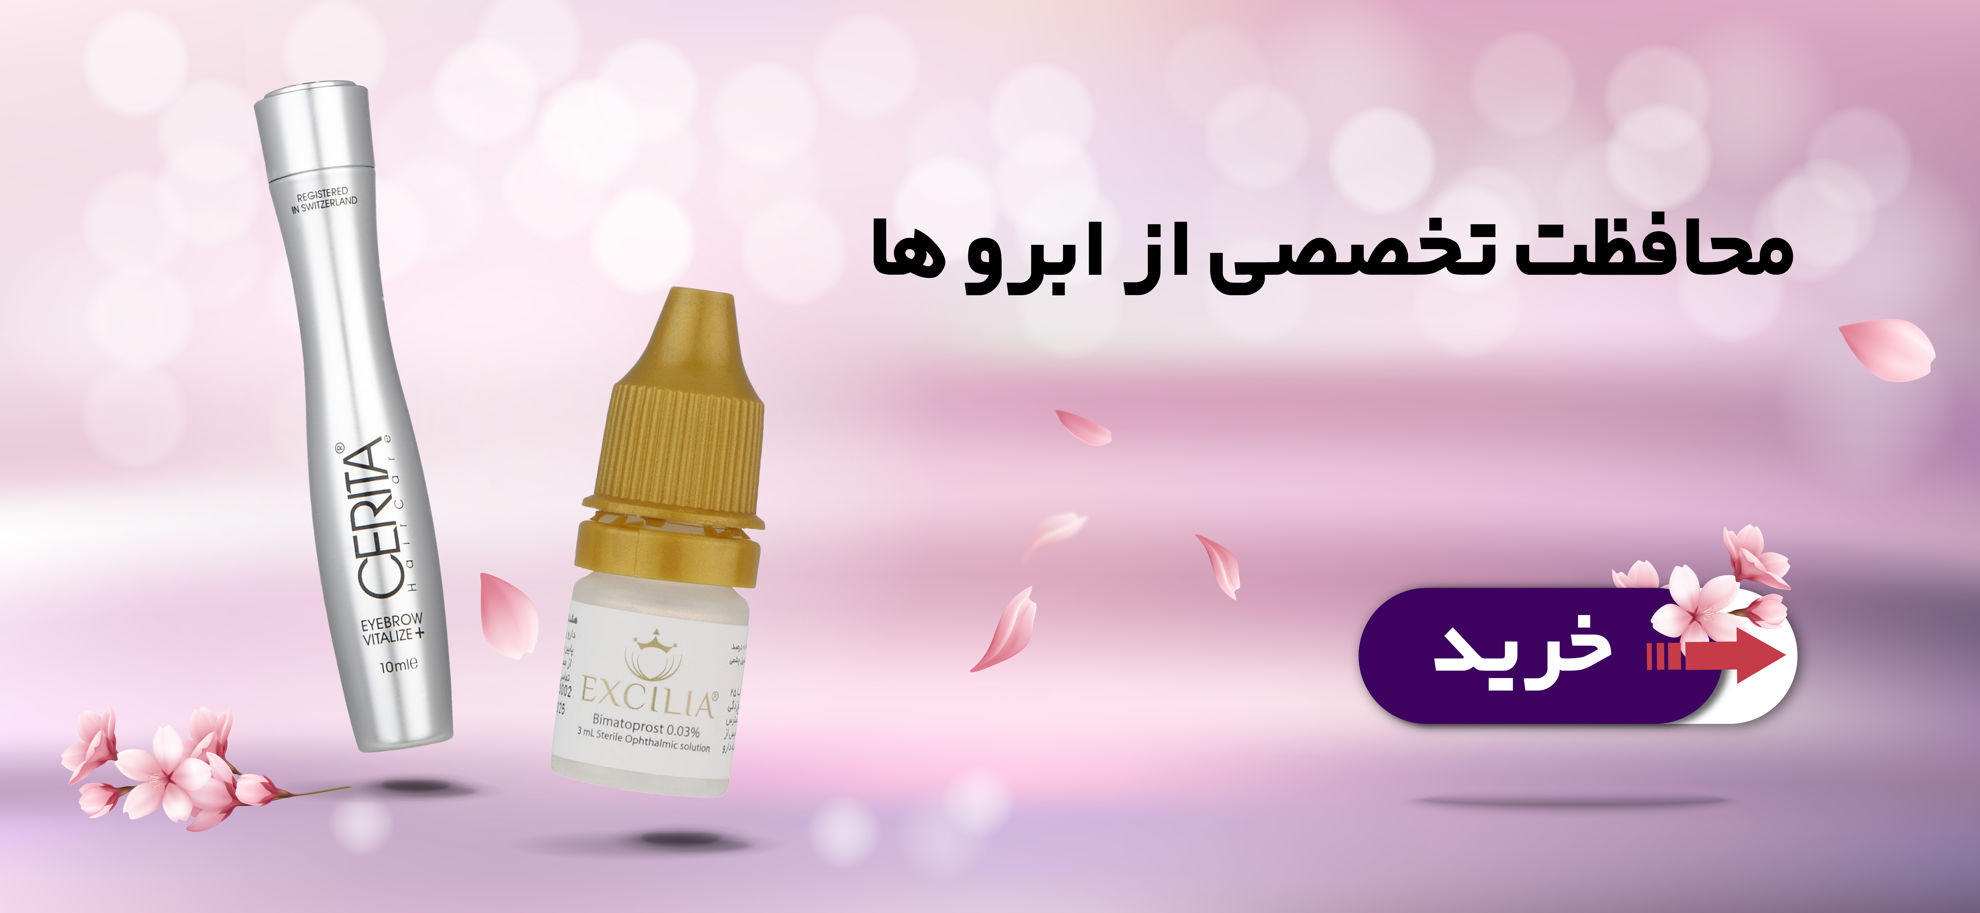 https://www.sabads.com/تقویت-مژه-و-ابرو?ShowStockProductsOnly=true